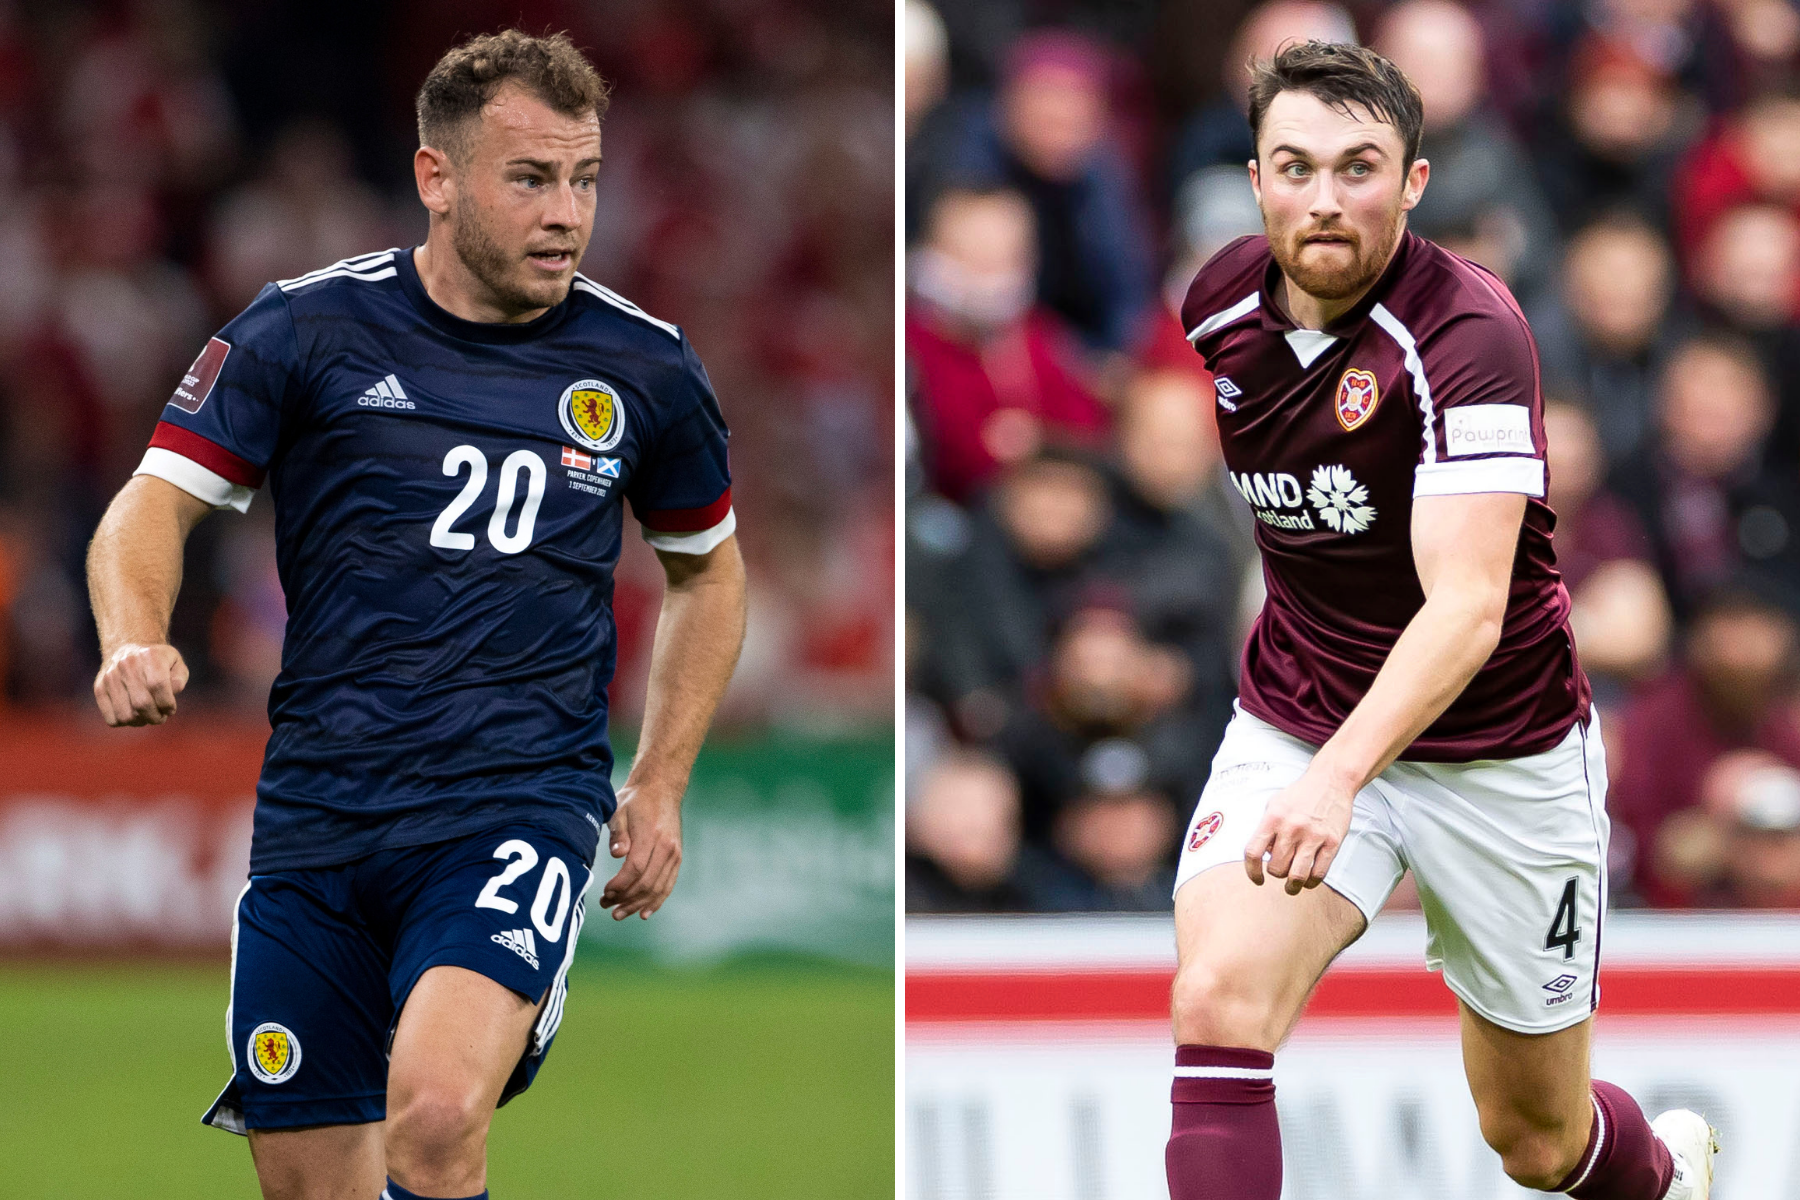 Newcastle United winger Ryan Fraser pulls out of Scotland squad as Hearts defender John Souttar is called up